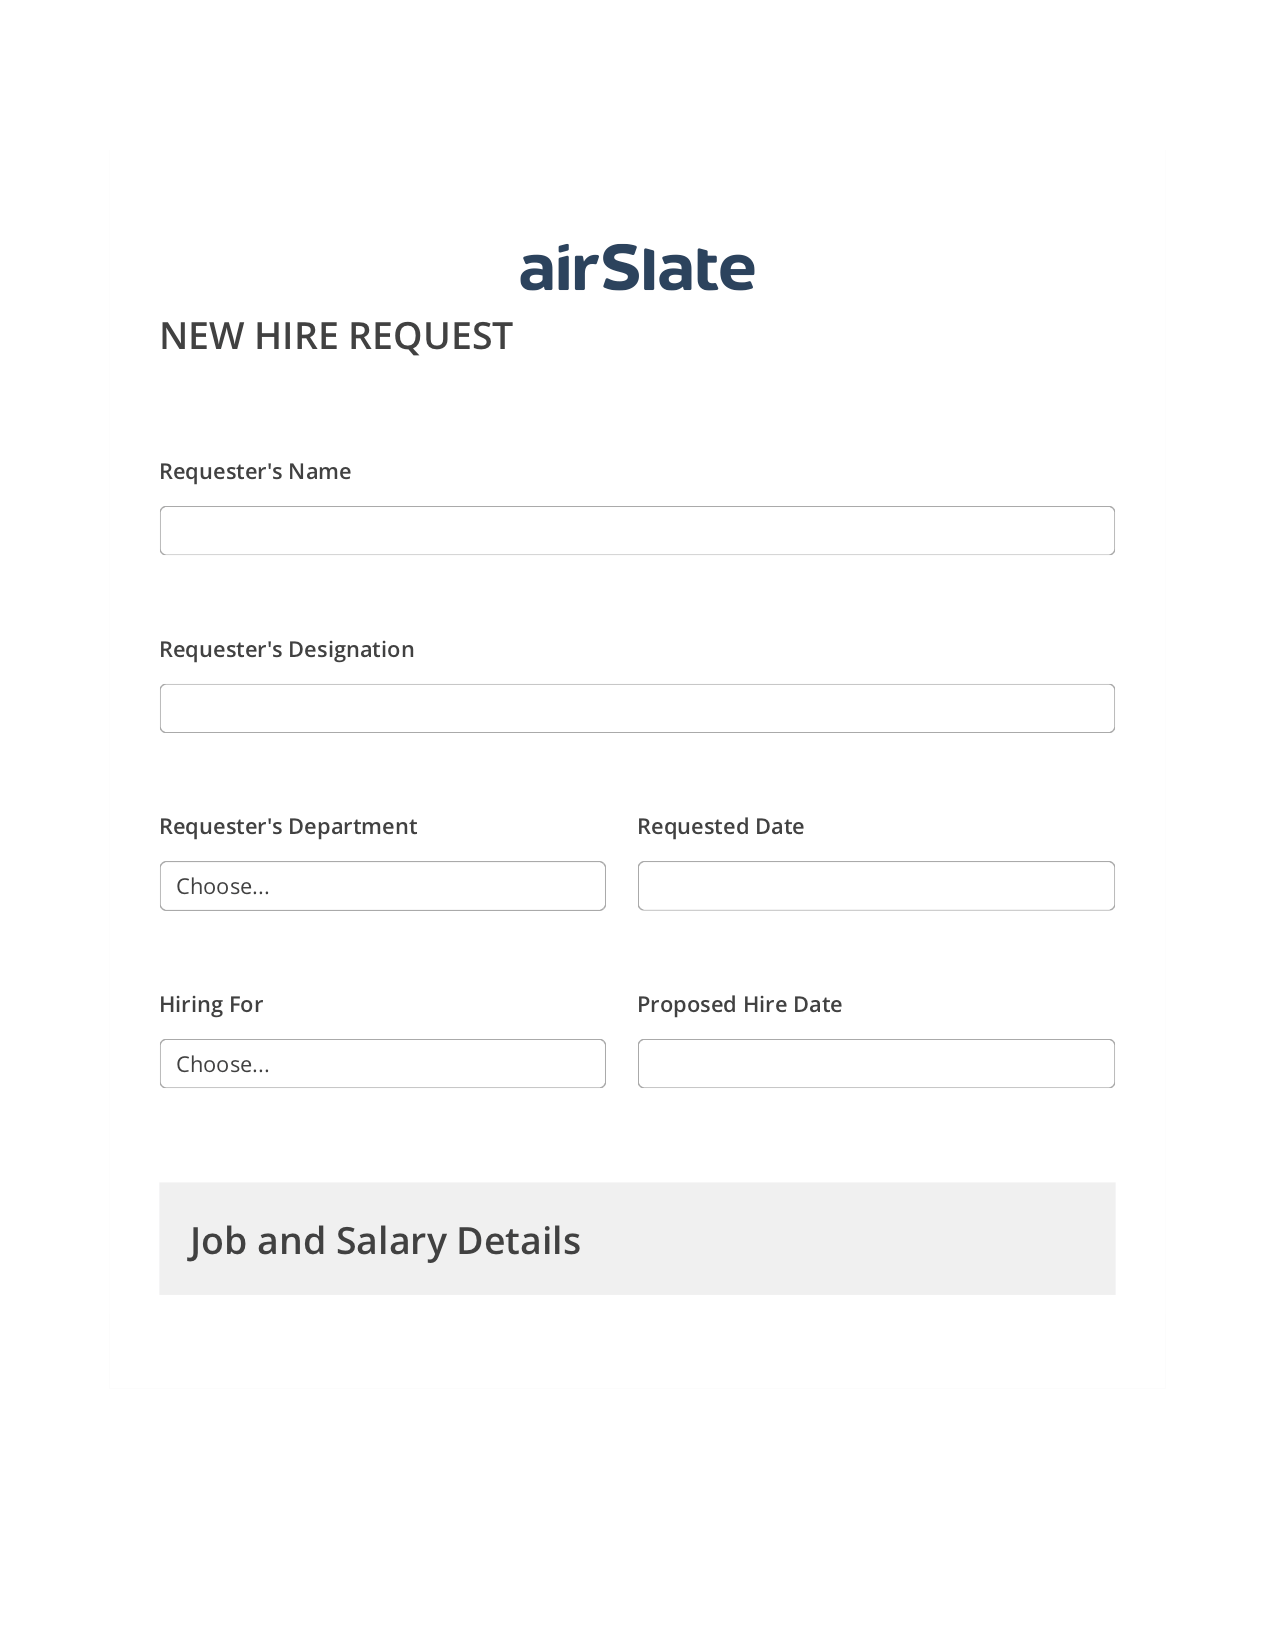 Multirole Hiring Request Workflow Pre-fill Dropdowns from Excel Bot, Remove Tags From Slate Bot, Archive to Box Bot